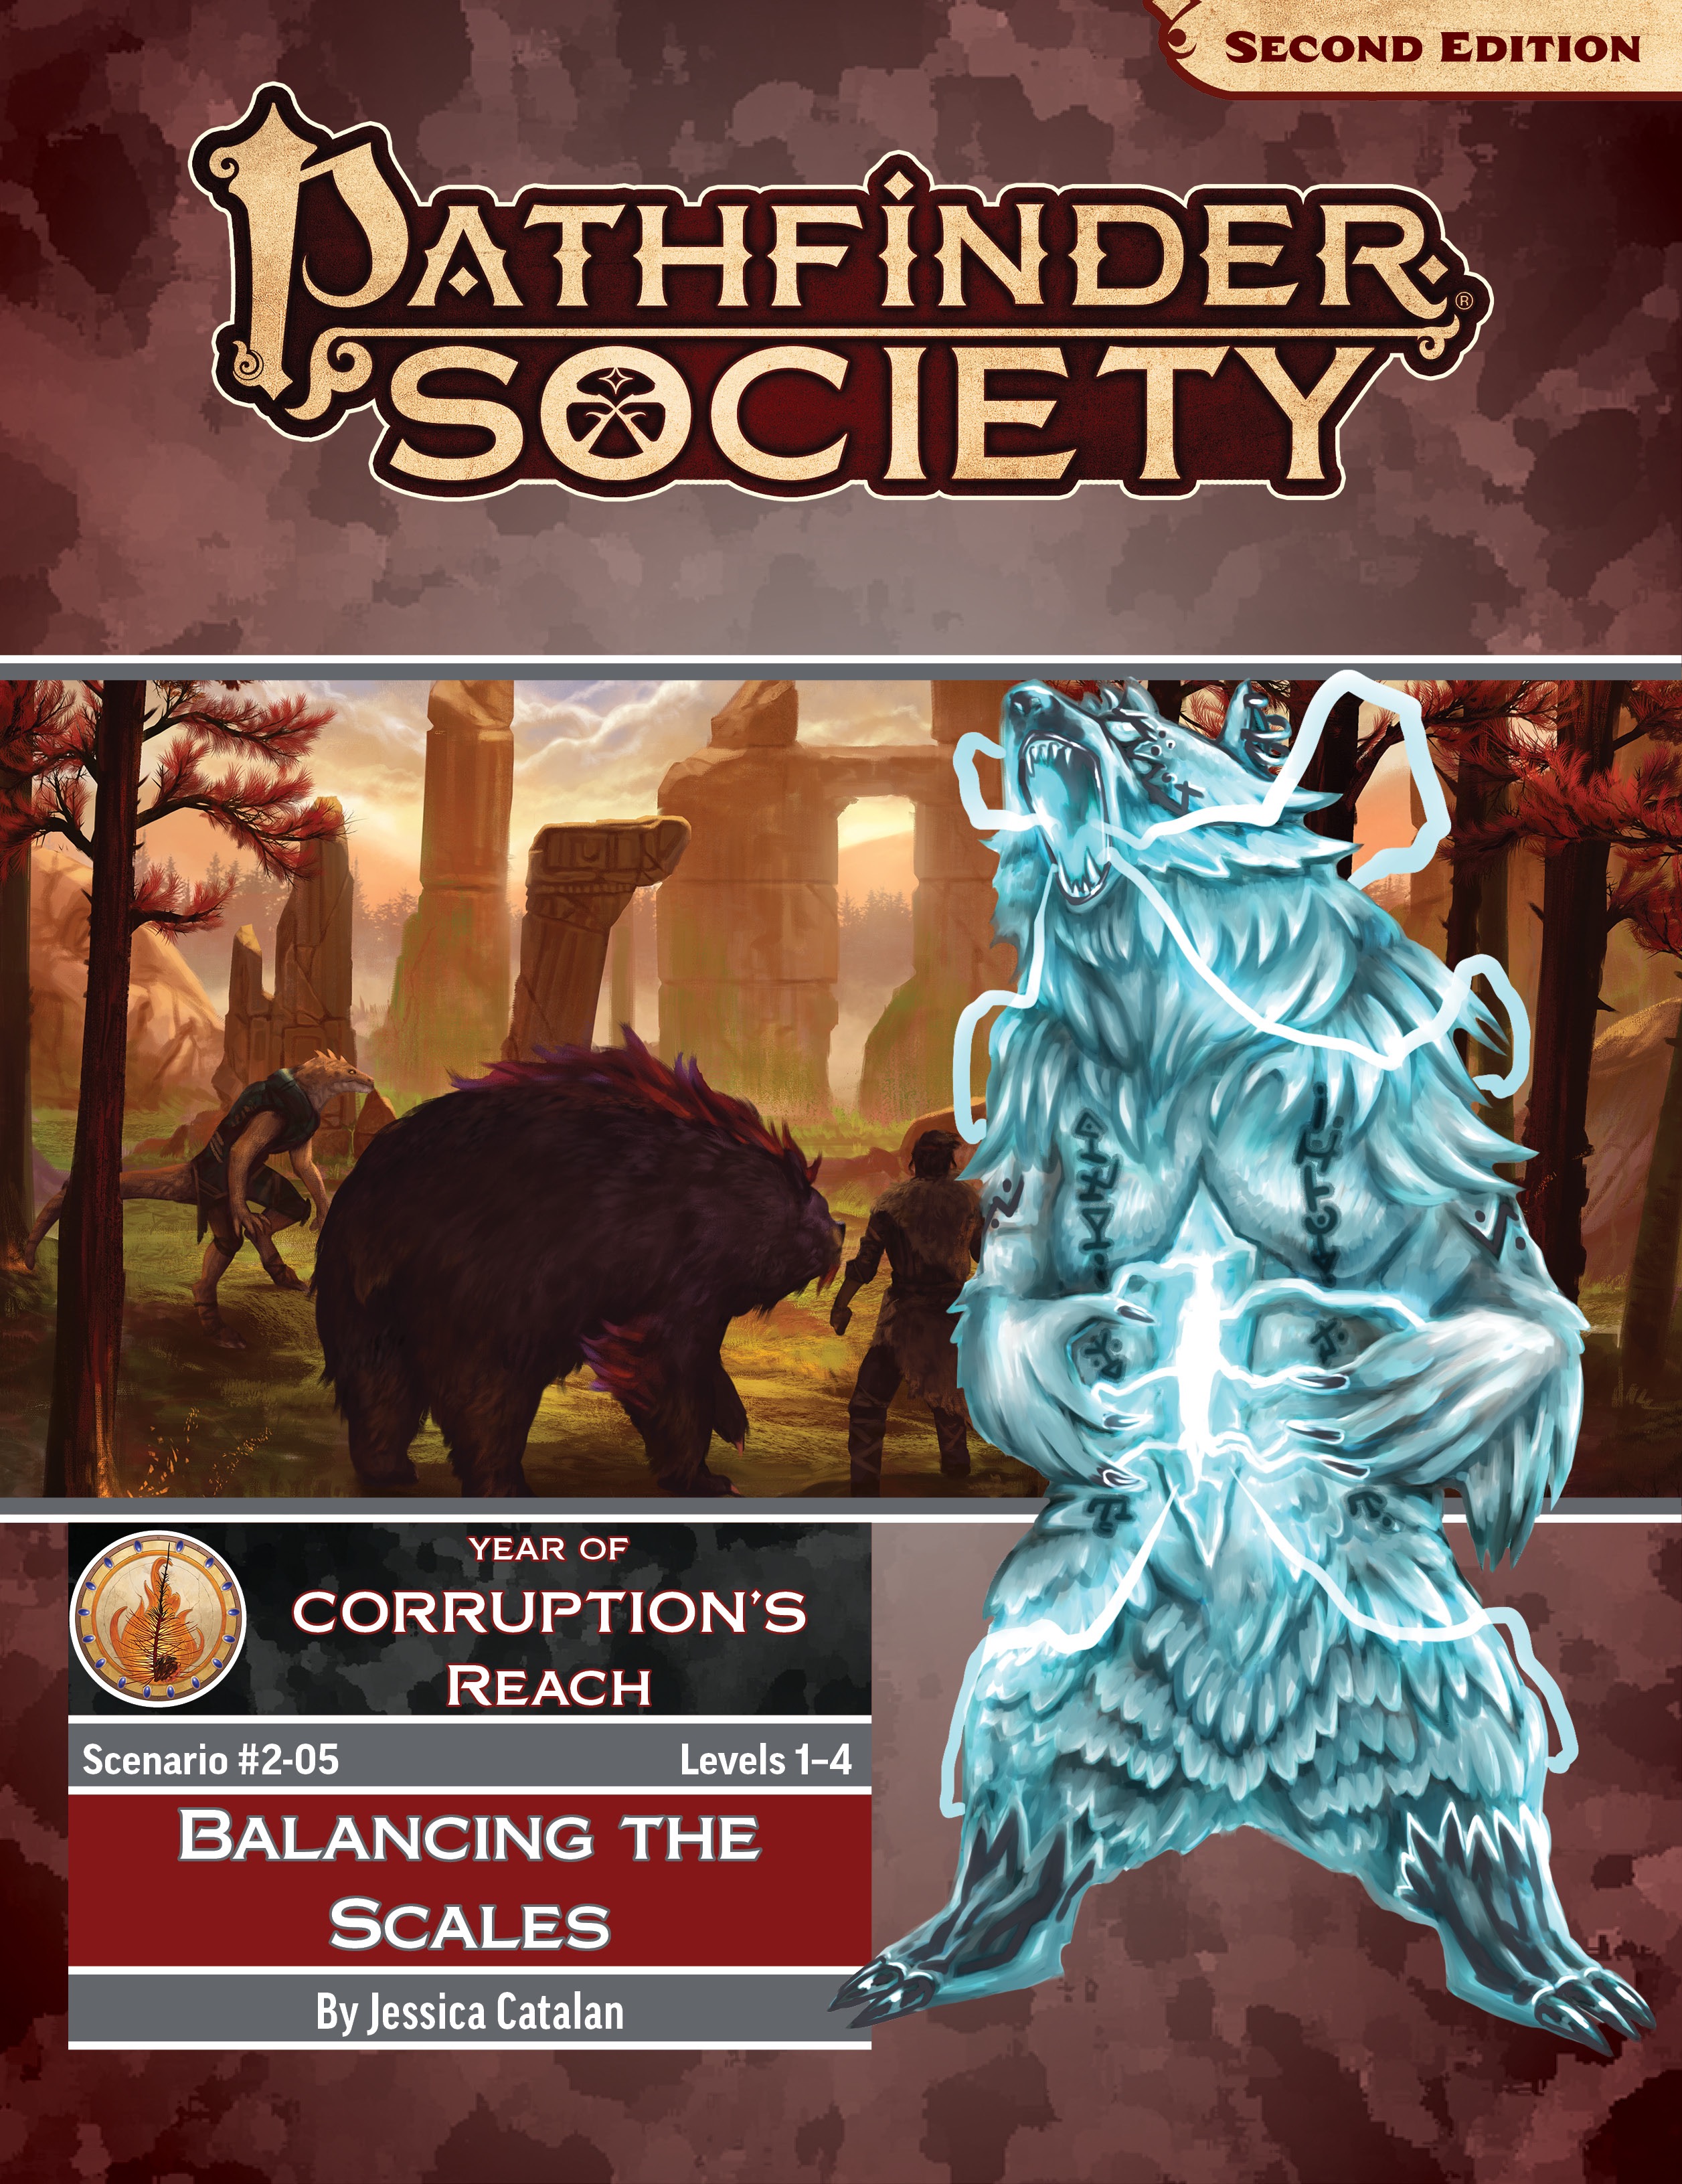 Pathfinder Society: Balancing the Scales. An illustration of a dark blue kobald over the top of an illustration of a bear in a burnt woods